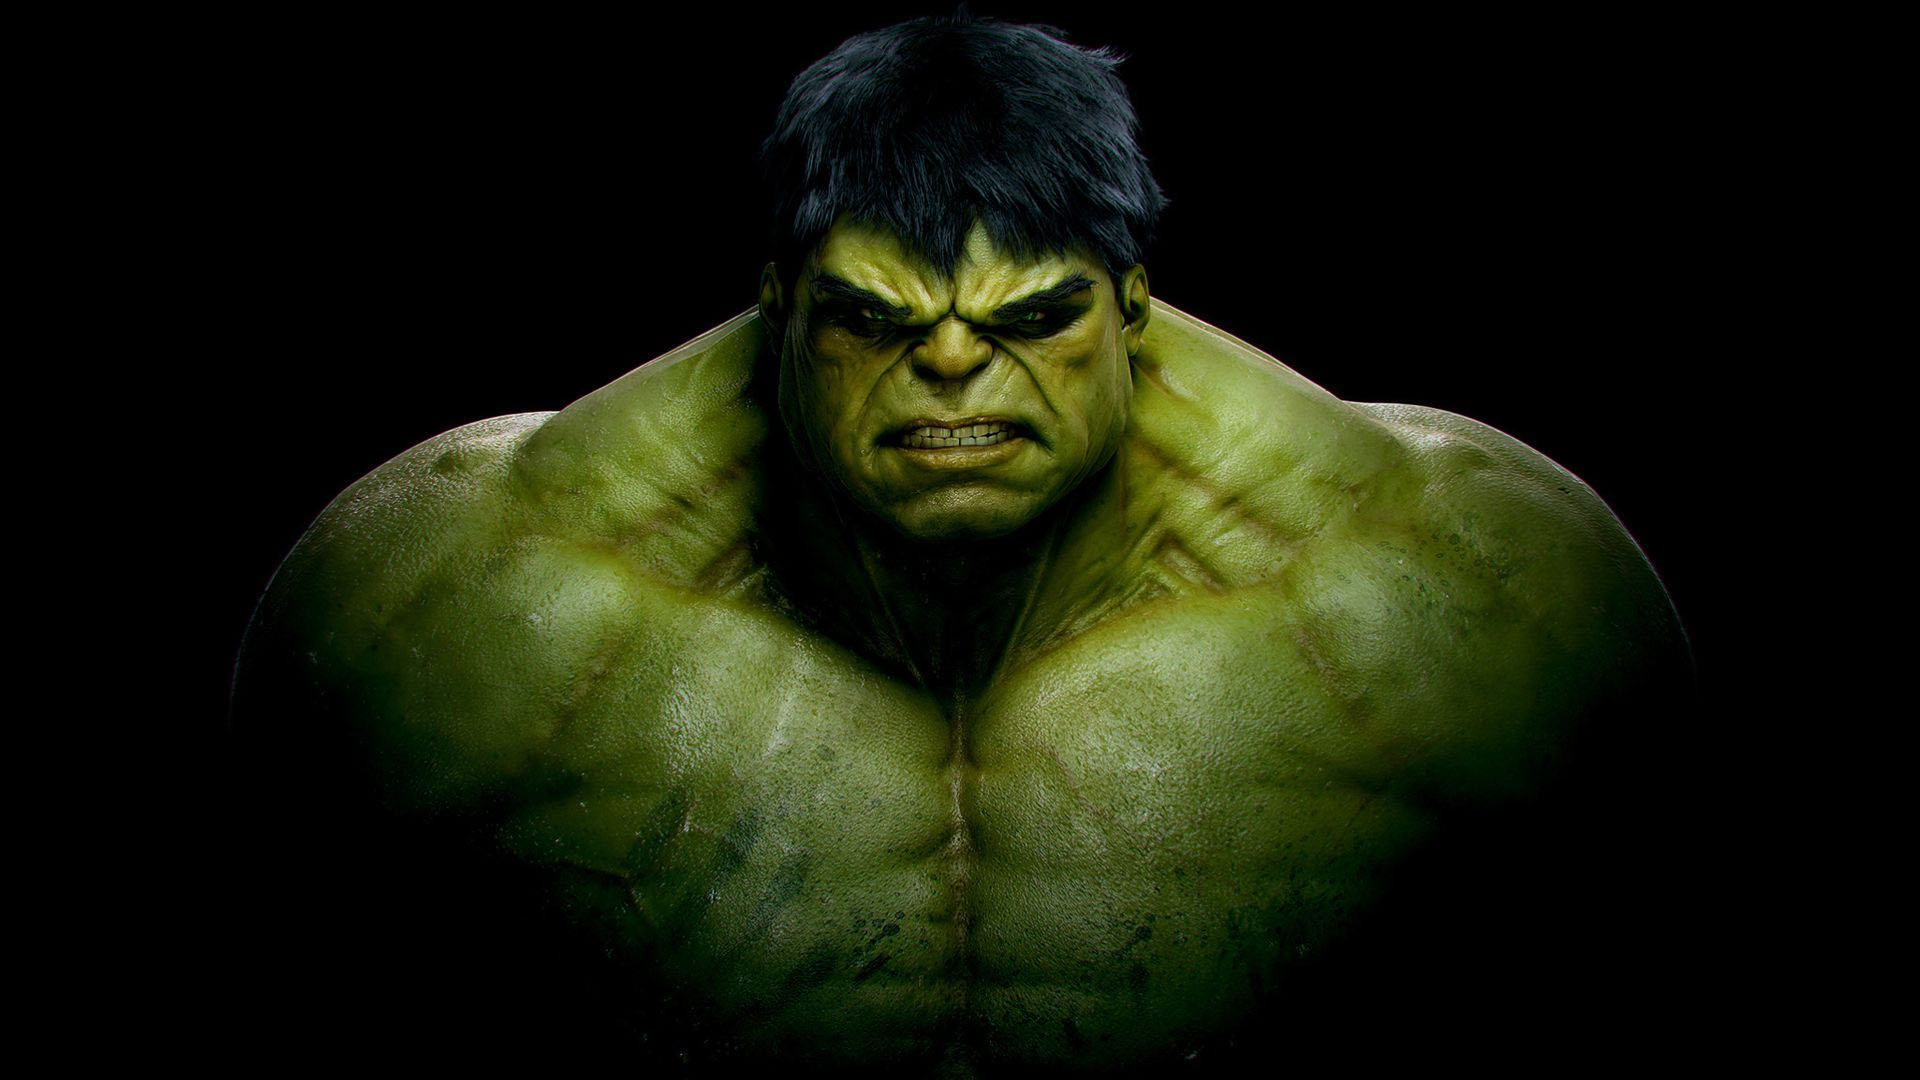 The HD X Hulk Wallpaper Image And Choose Set As Background